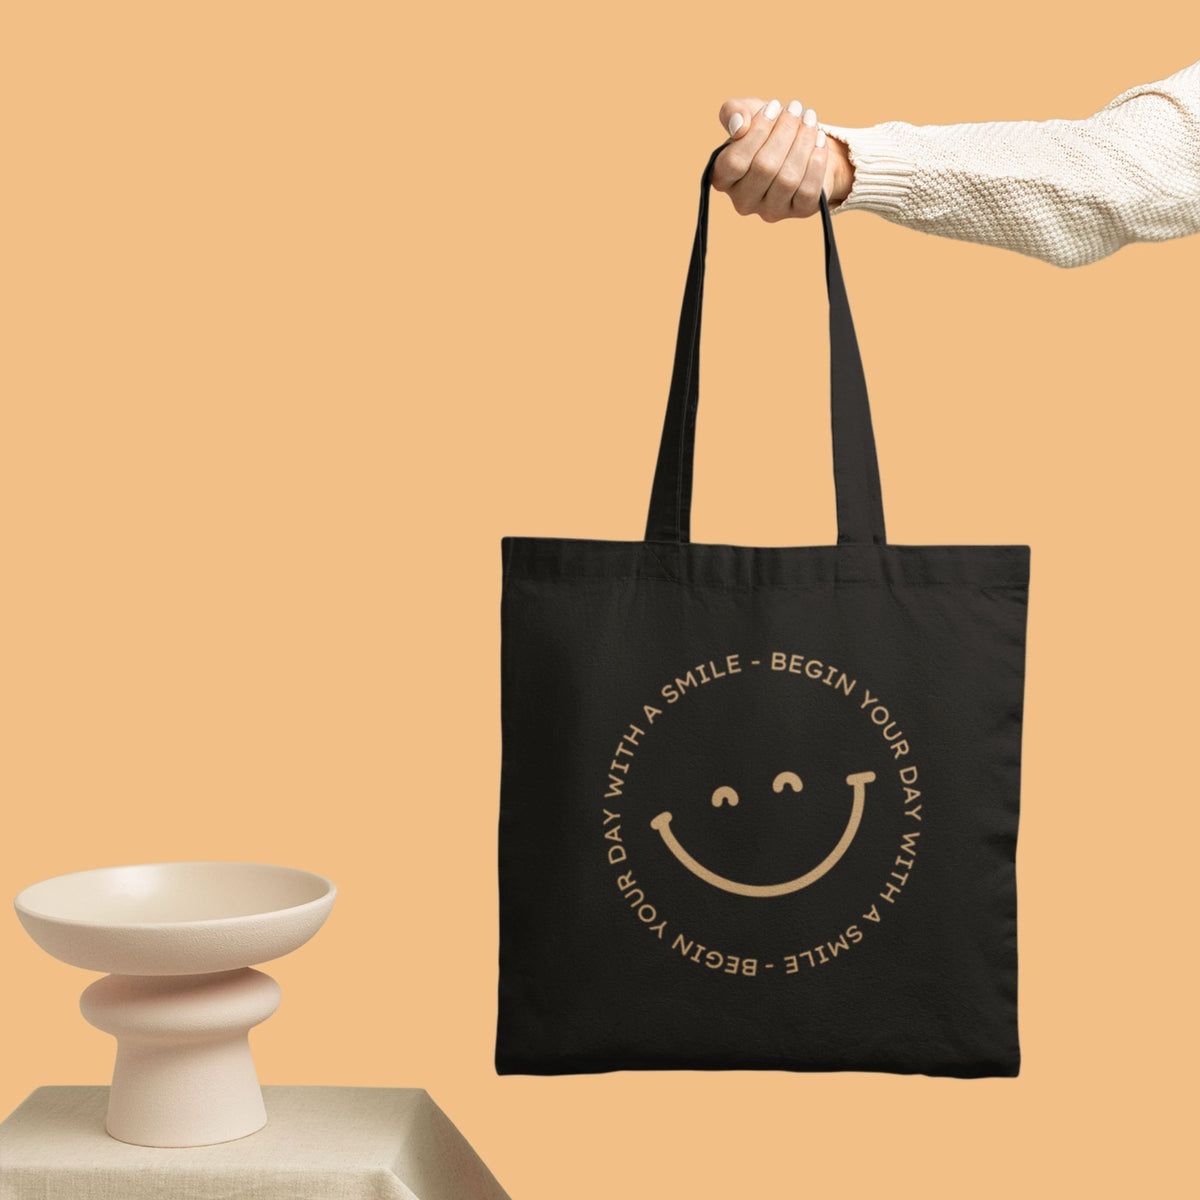 begin-your-day-with-a-smile-cotton-printed-black-tote-bag-gogirgit-2